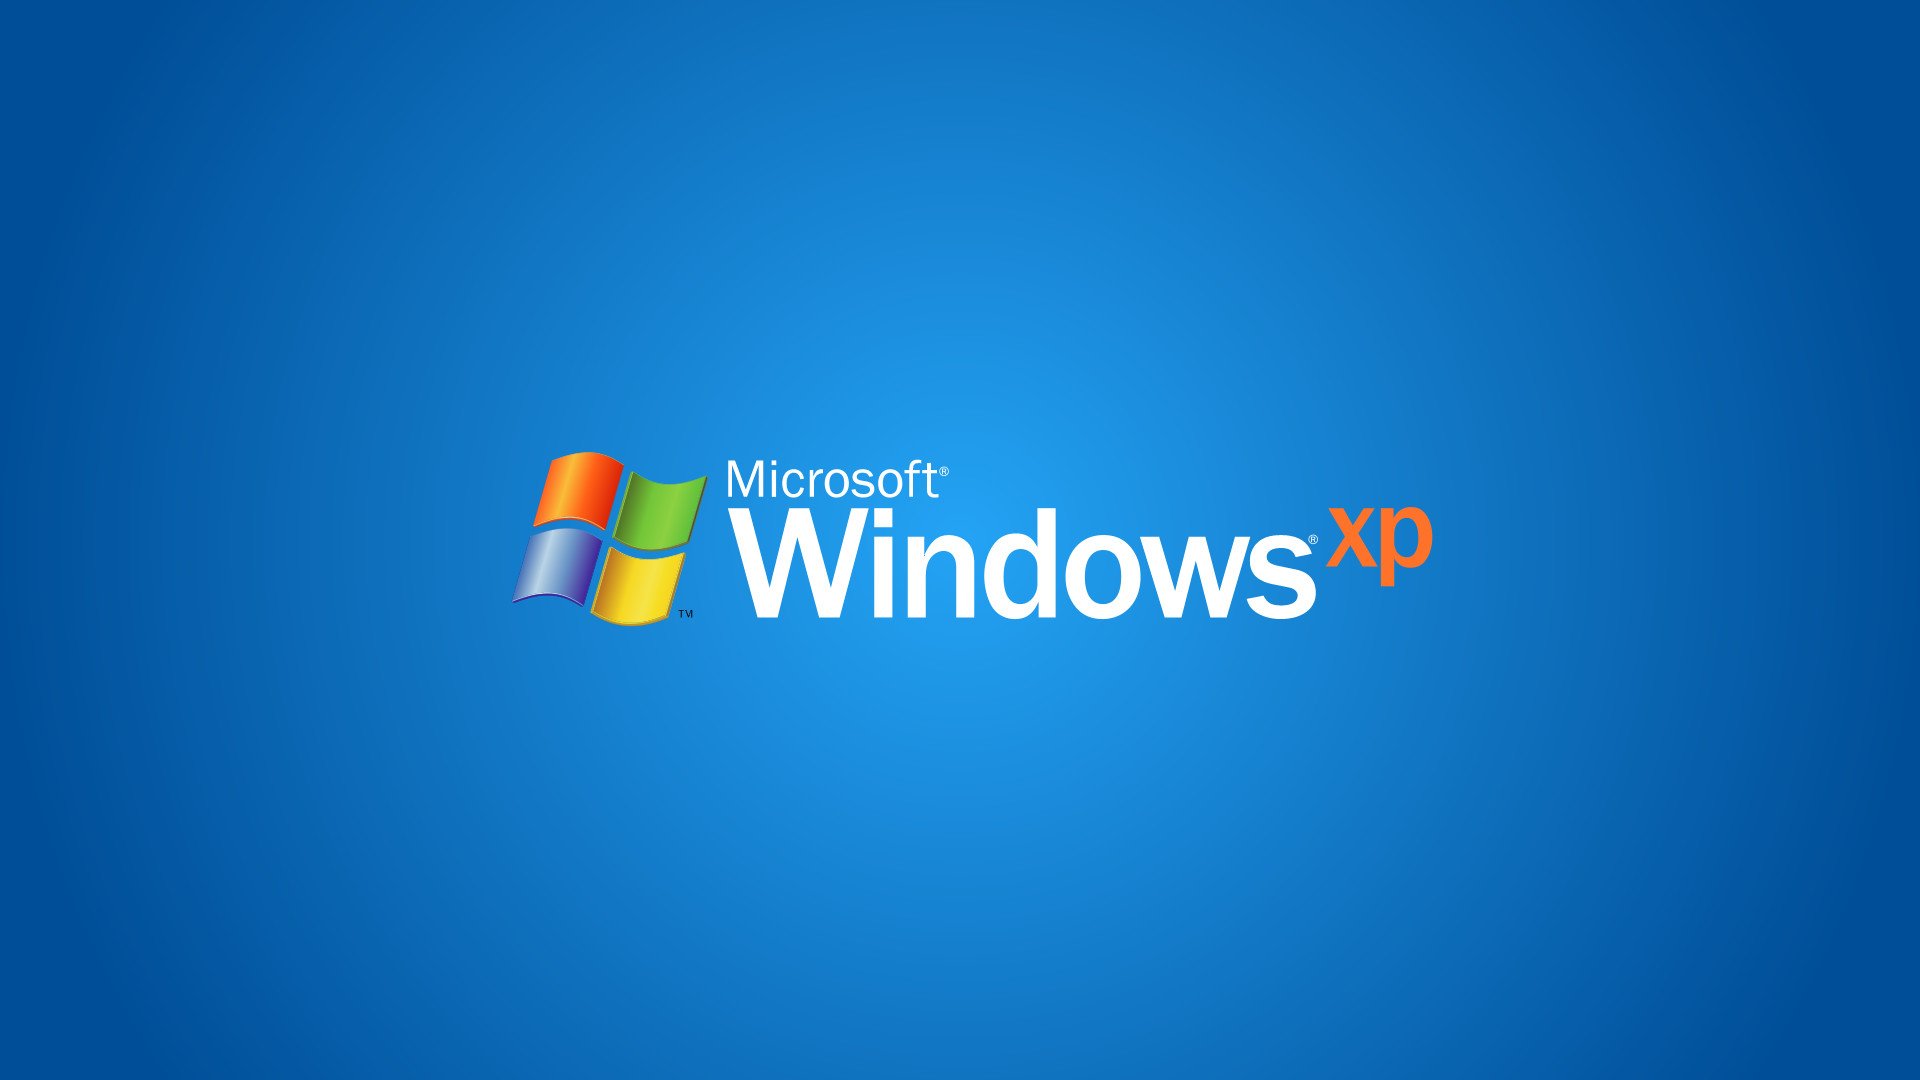 Windows XP Home Edition Wallpaper (48+ images)